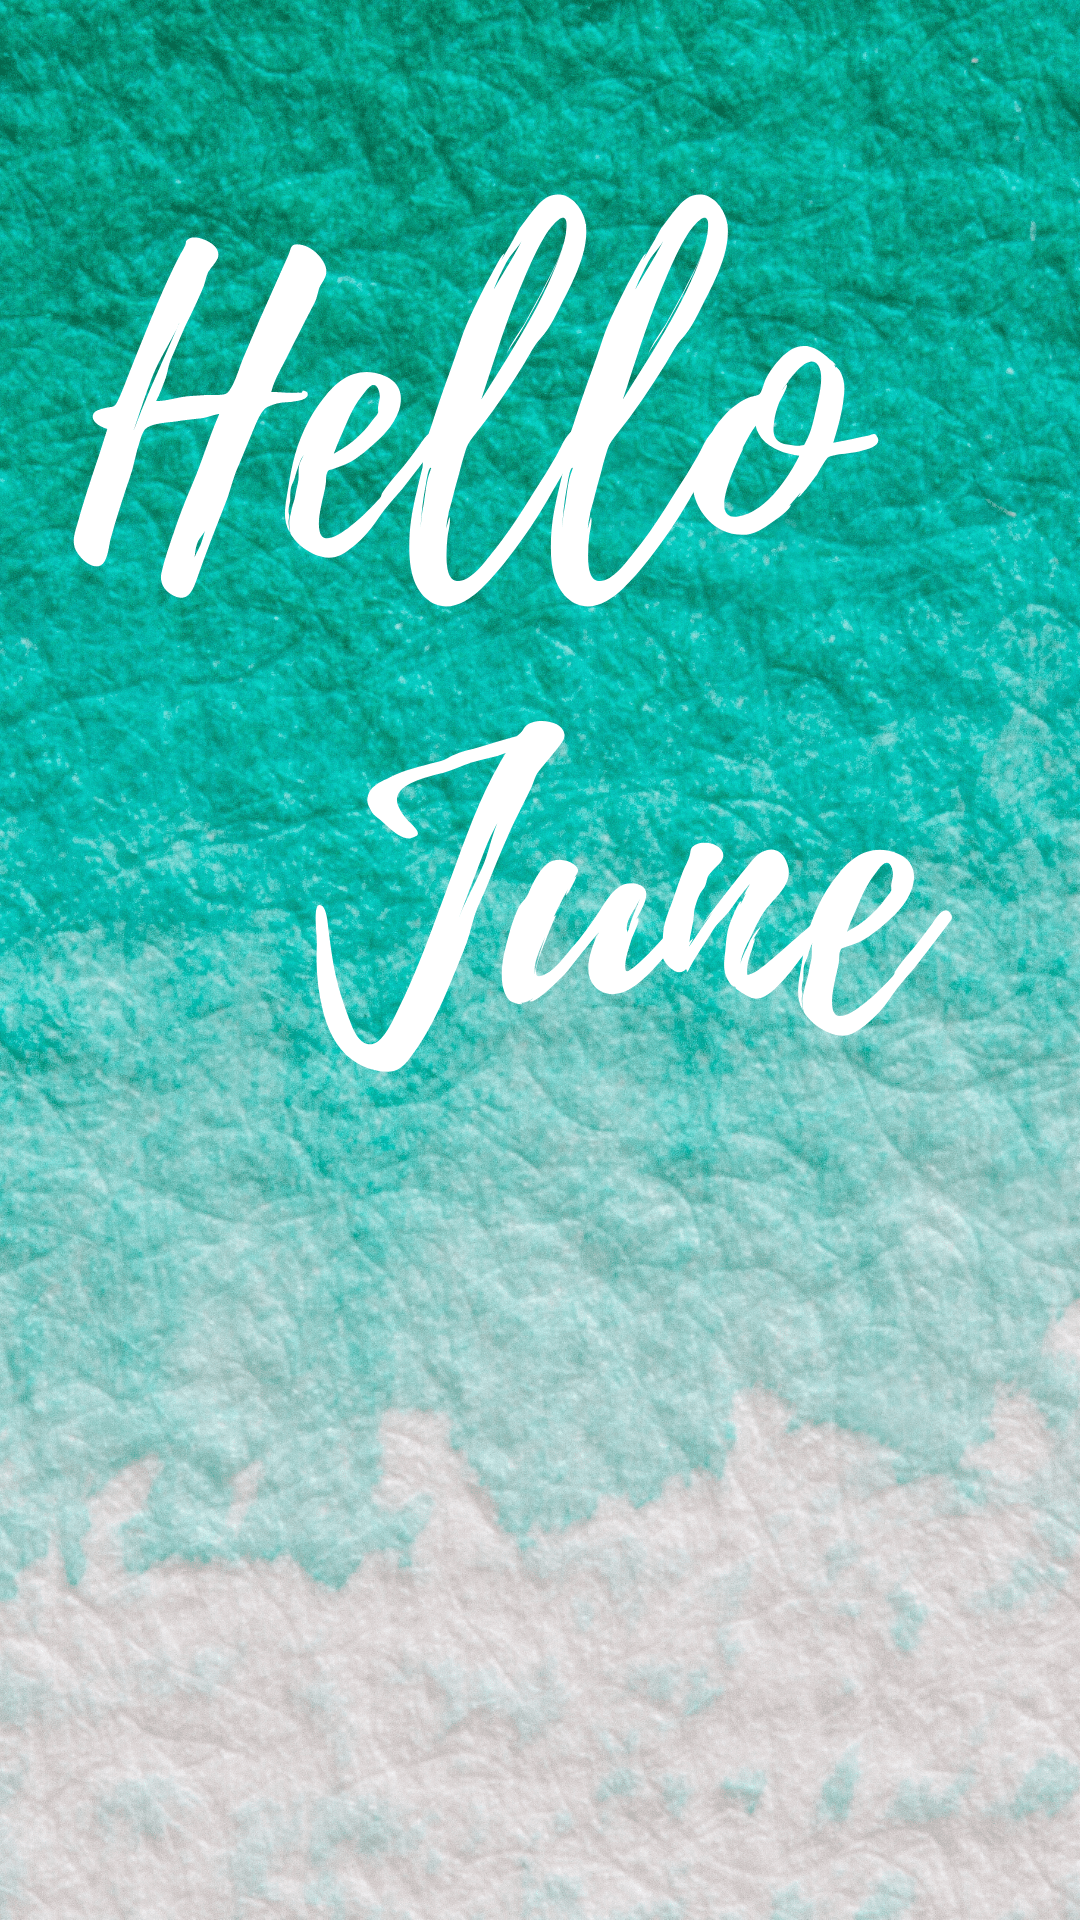 Hello June on a blue and green watercolor background - June